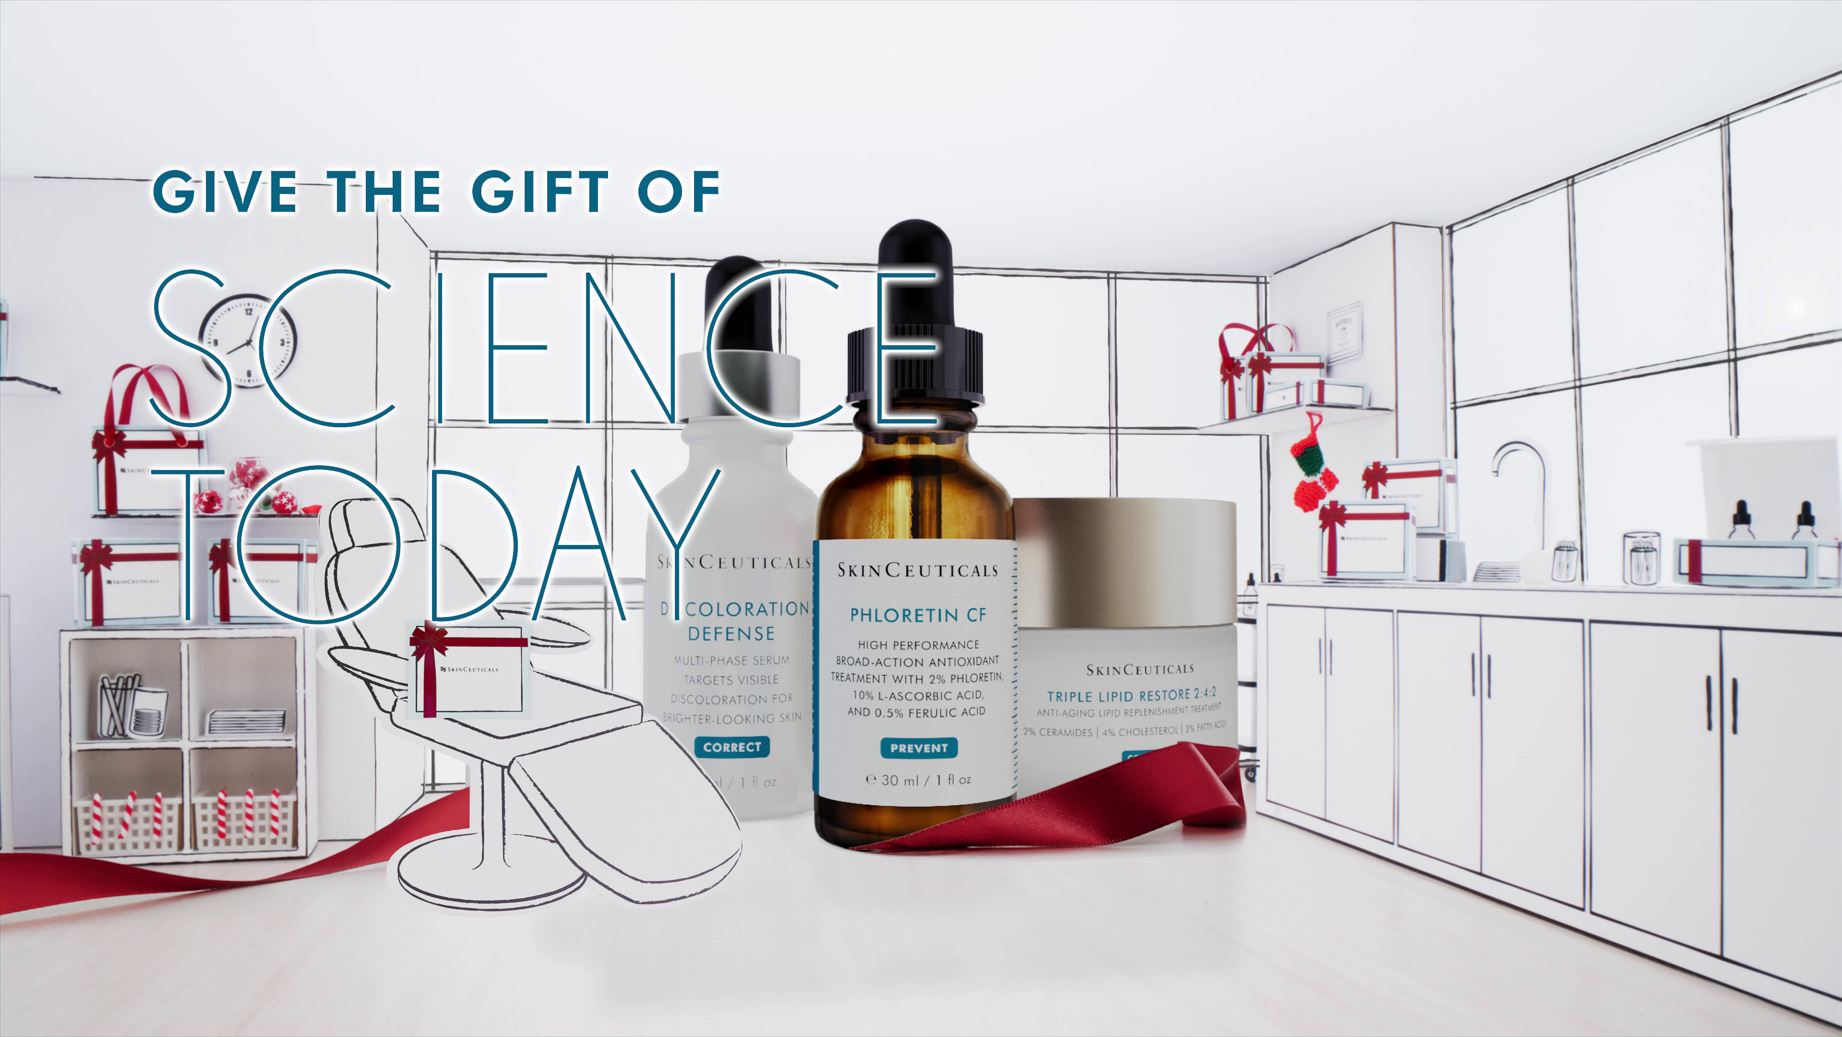 Skinceuticals - The Gift of Science - Group C